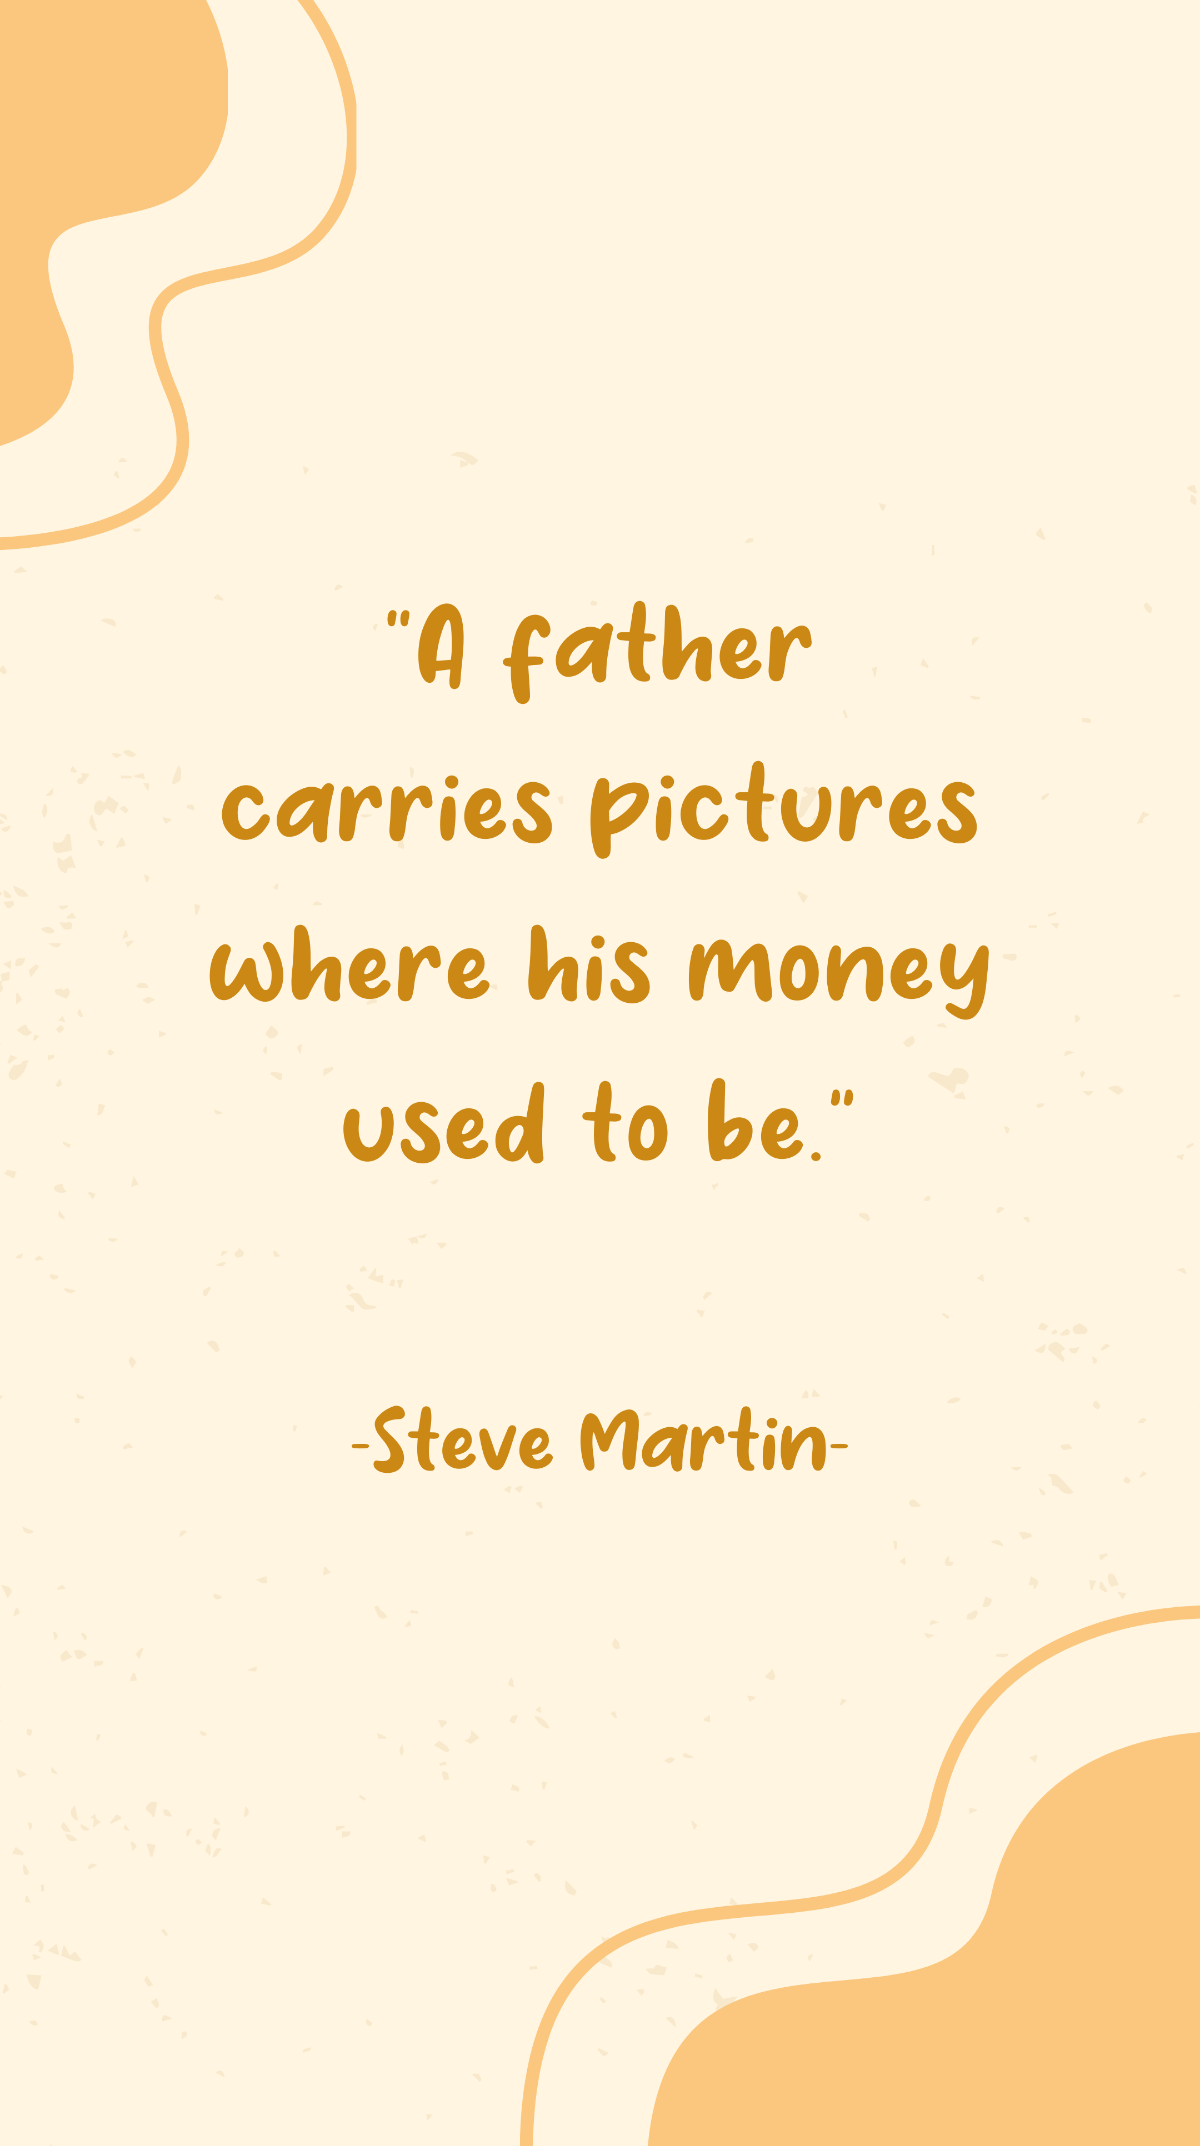 Steve Martin - A father carries pictures where his money used to be. Template